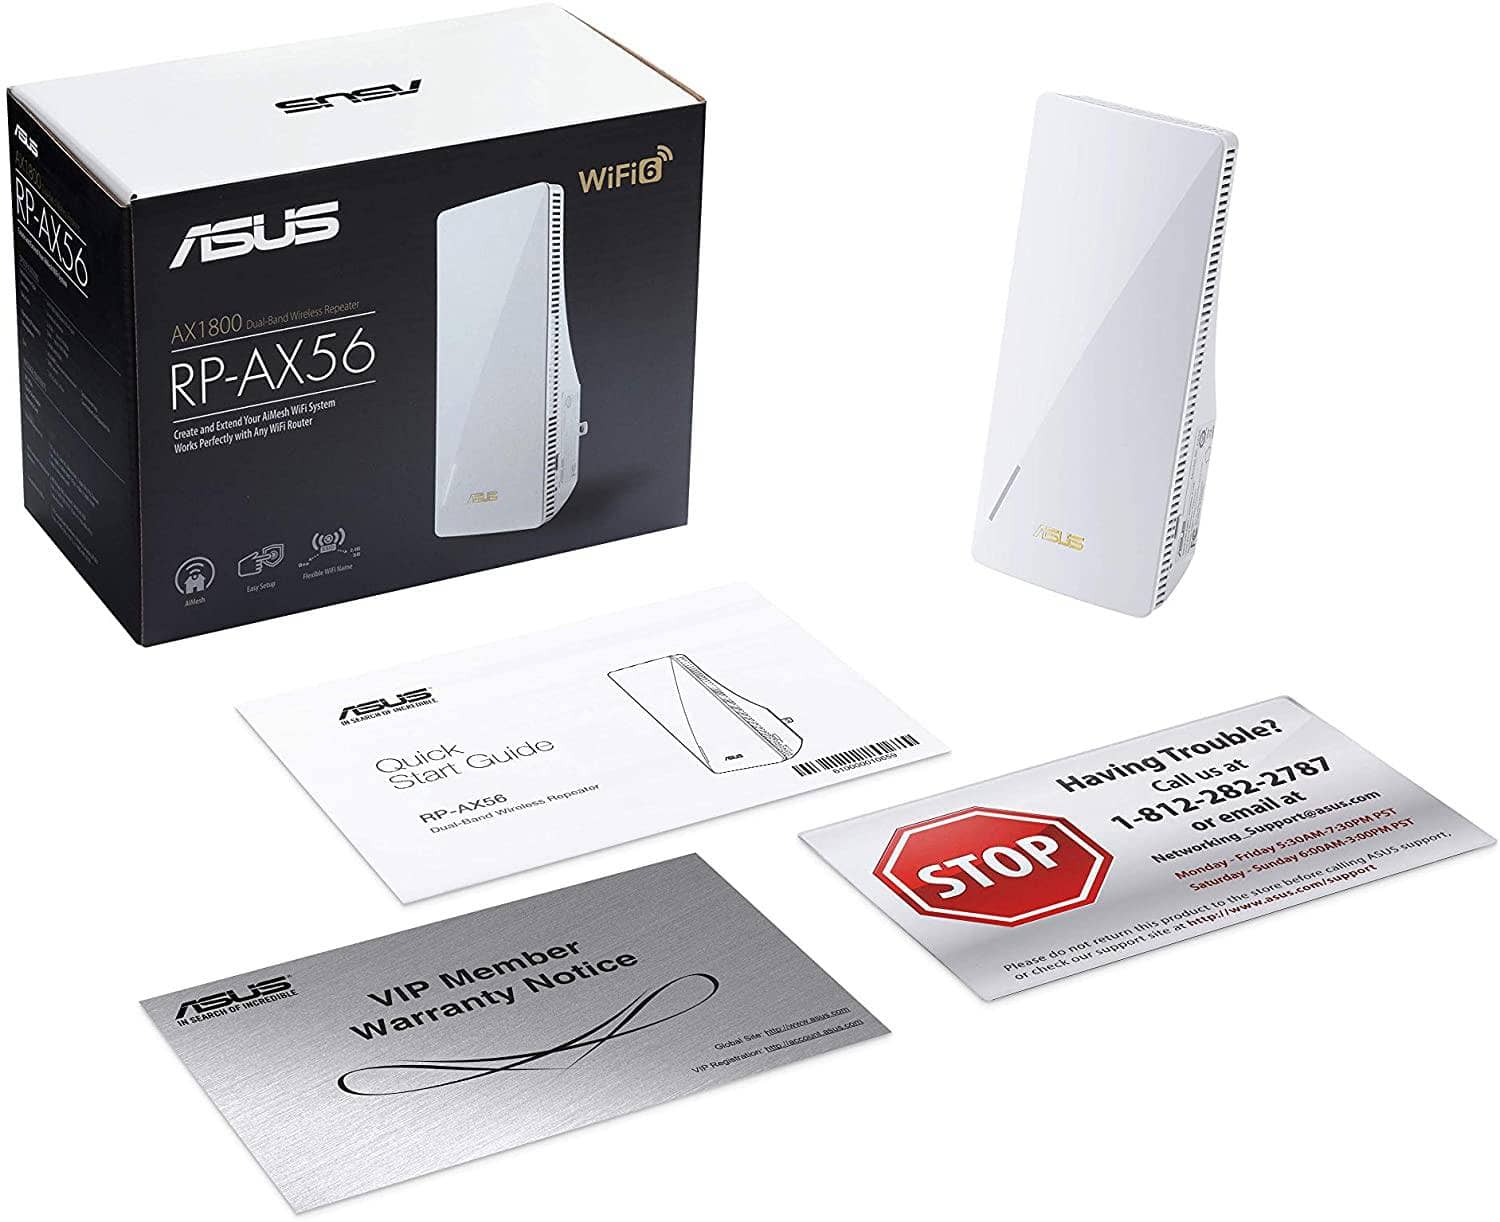 ASUS AC1750 WiFi Router (RT-AC66U B1) - Dual Band Gigabit Wireless Internet Router ASUSWRT Gaming & Streaming AiMesh Compatible Included Lifetime Internet Security Adaptive QoS Parental Control - DealYaSteal